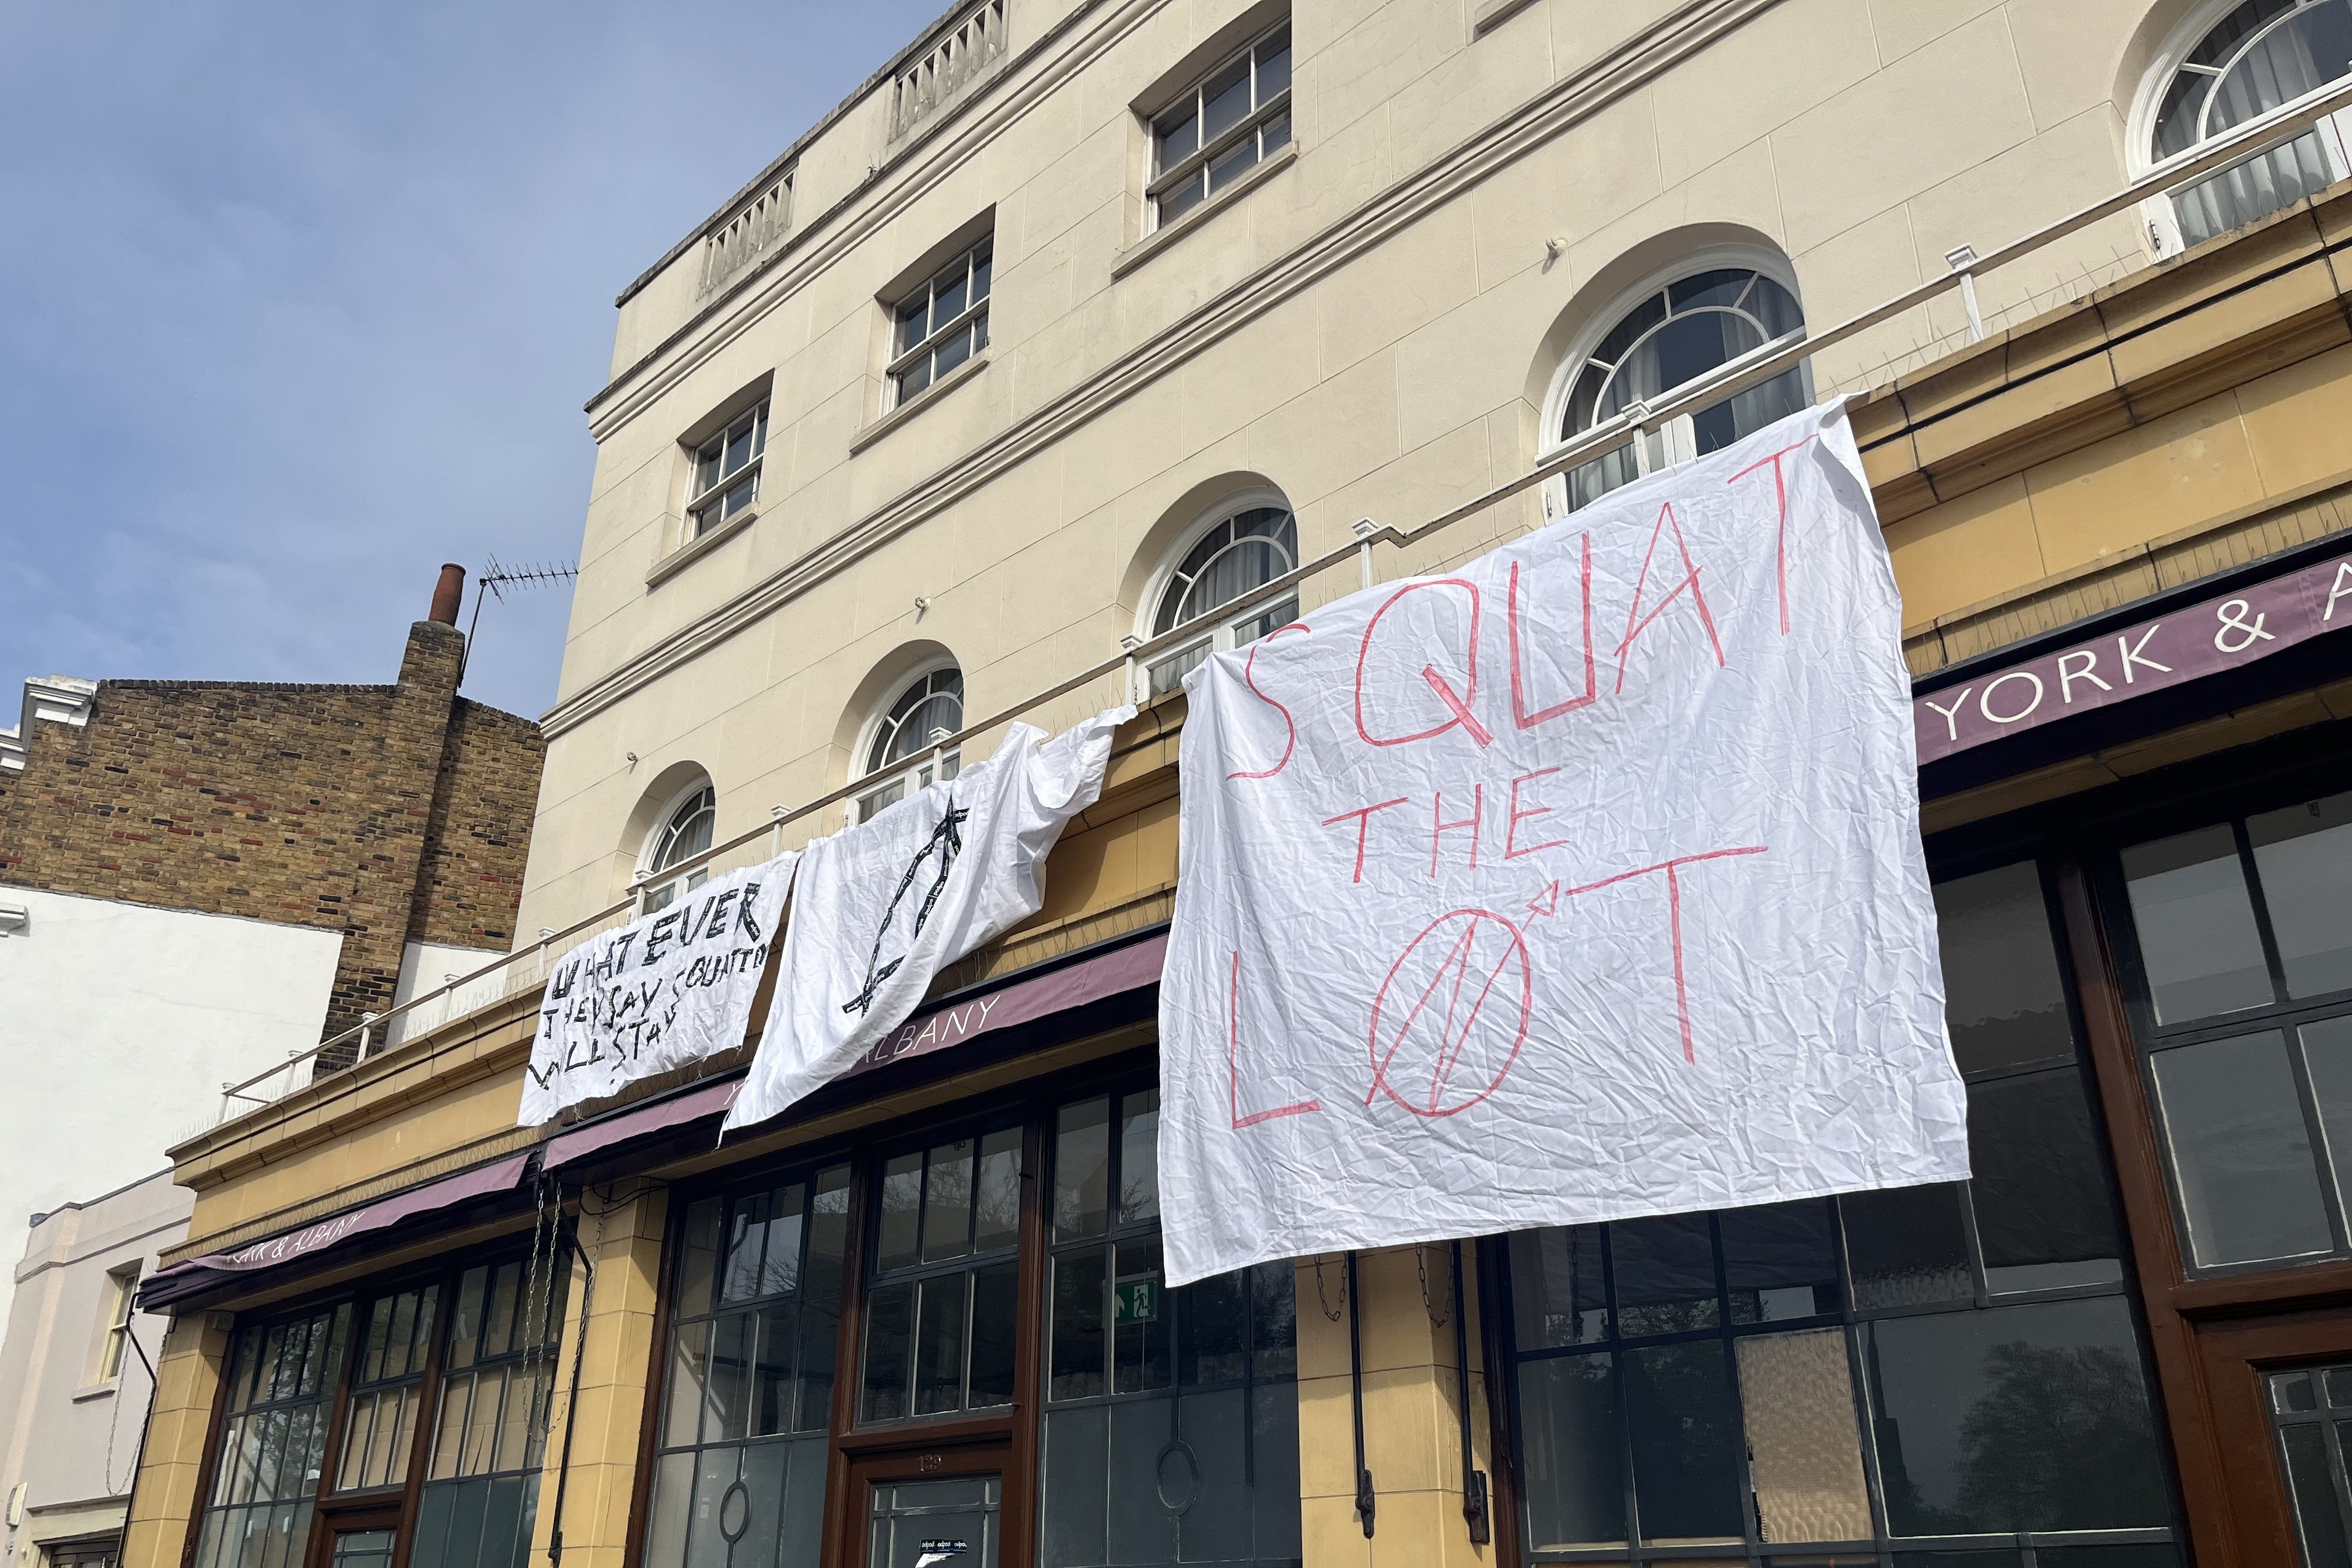 The squatters locked themselves inside Grade II-listed York & Albany hotel and gastropub